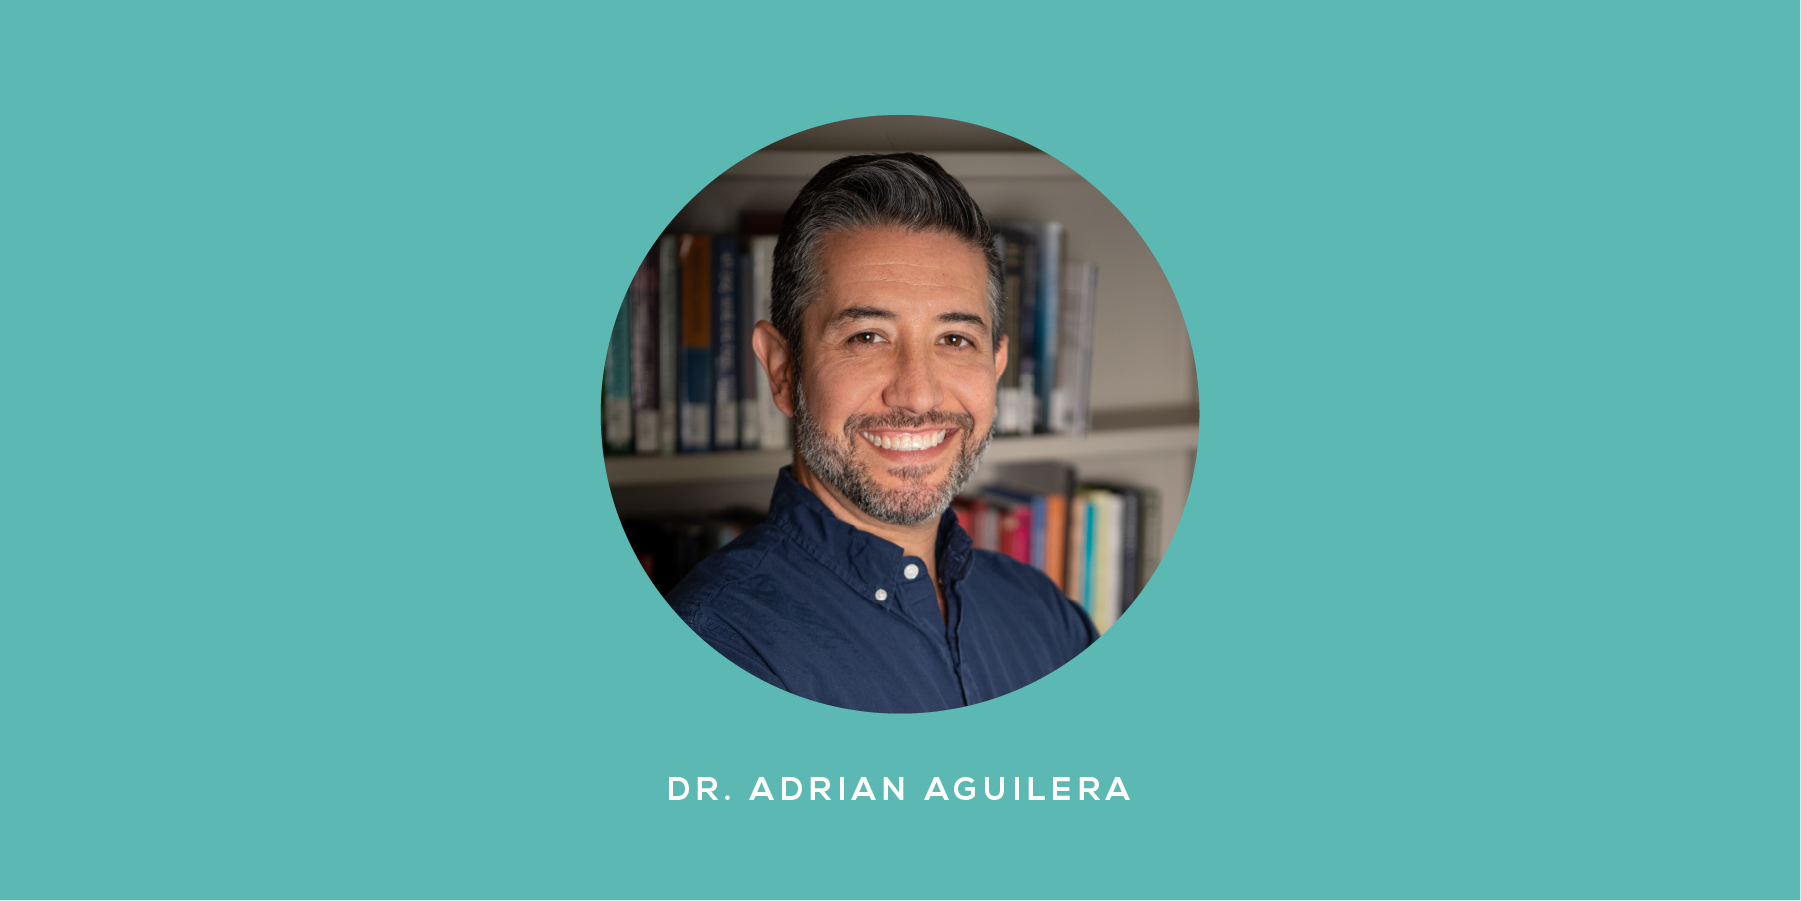 Picture of Dr. Adrian Aguilera for Hispanic Heritage Month